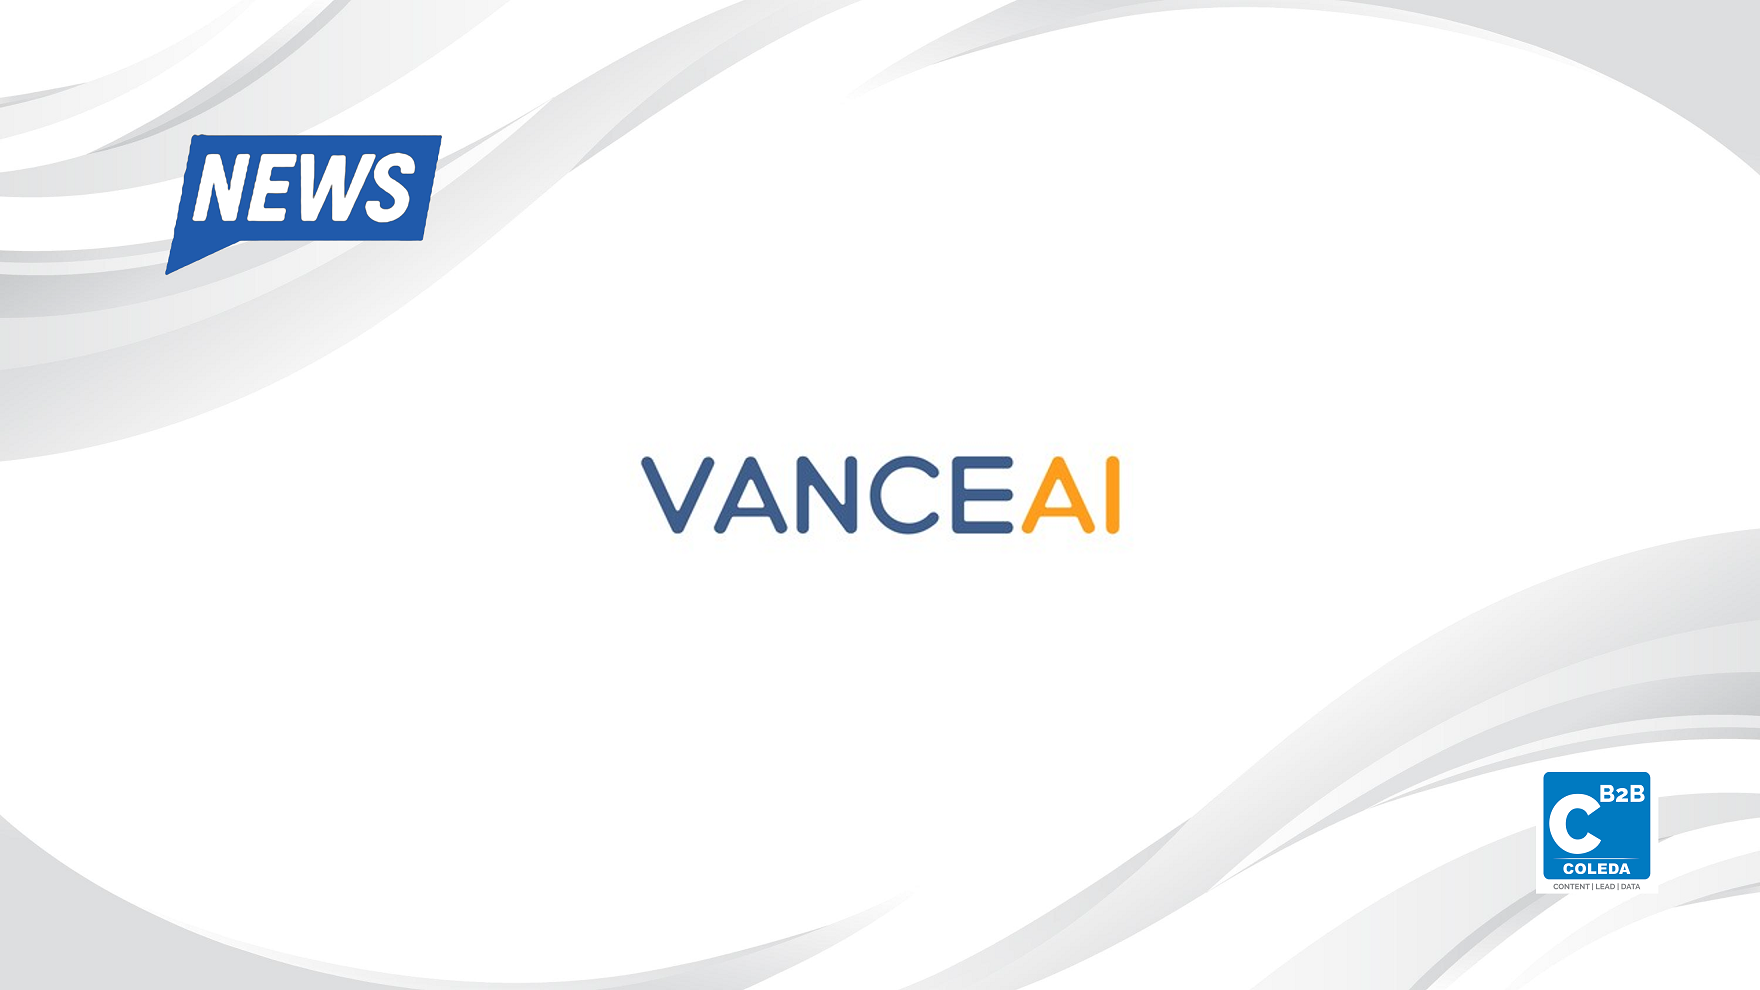 VanceAI releases its AI text-to-image generator powered by Stable Diffusion